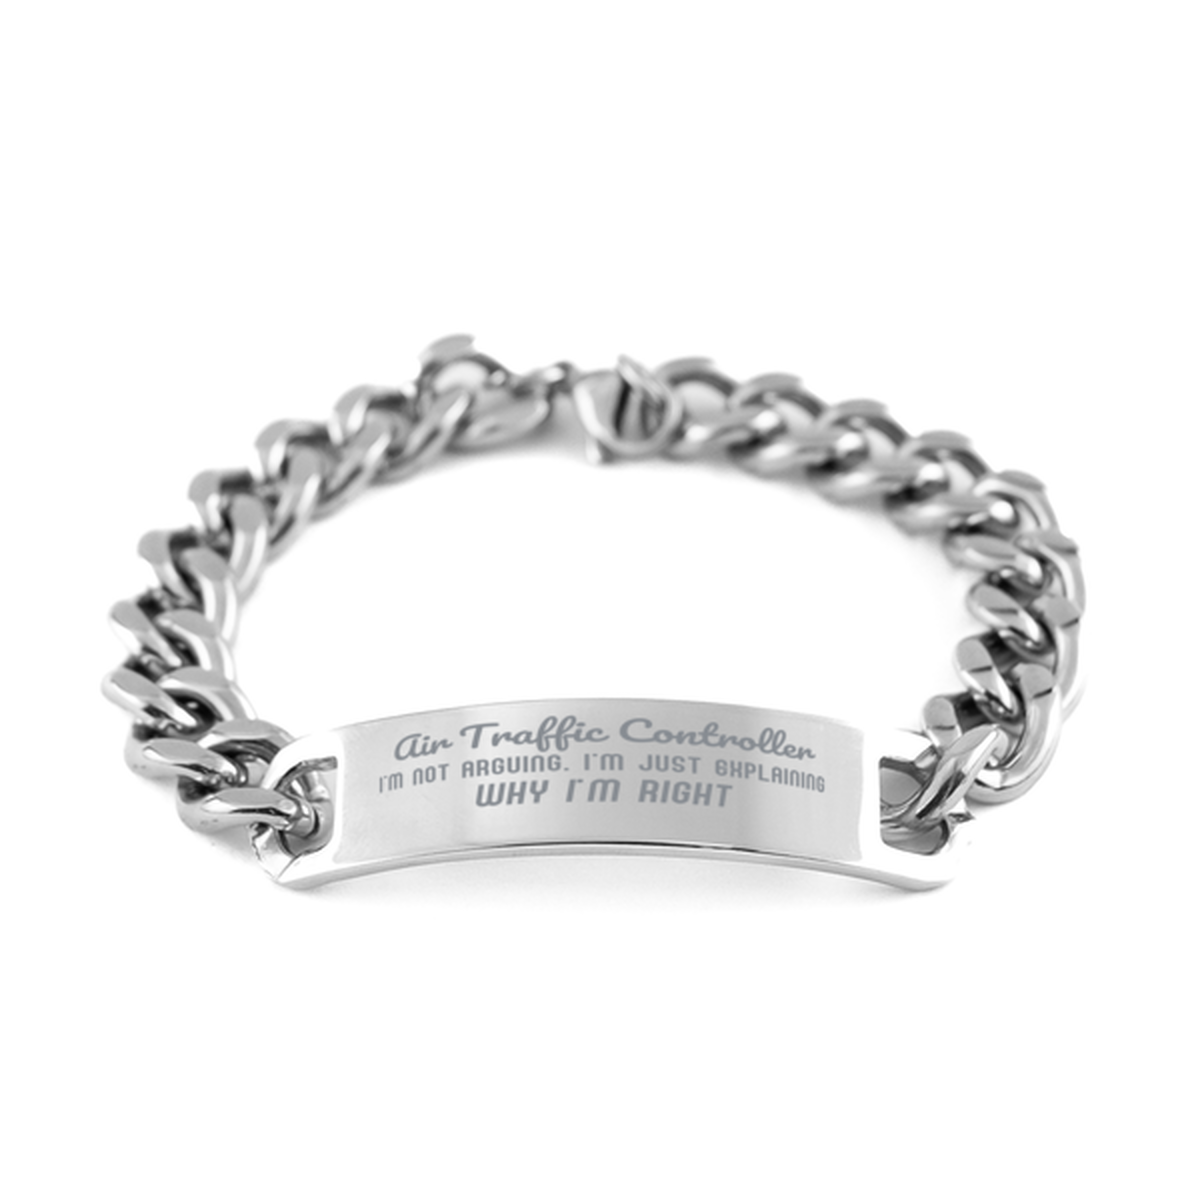 Air Traffic Controller I'm not Arguing. I'm Just Explaining Why I'm RIGHT Cuban Chain Stainless Steel Bracelet, Graduation Birthday Christmas Air Traffic Controller Gifts For Air Traffic Controller Funny Saying Quote Present for Men Women Coworker